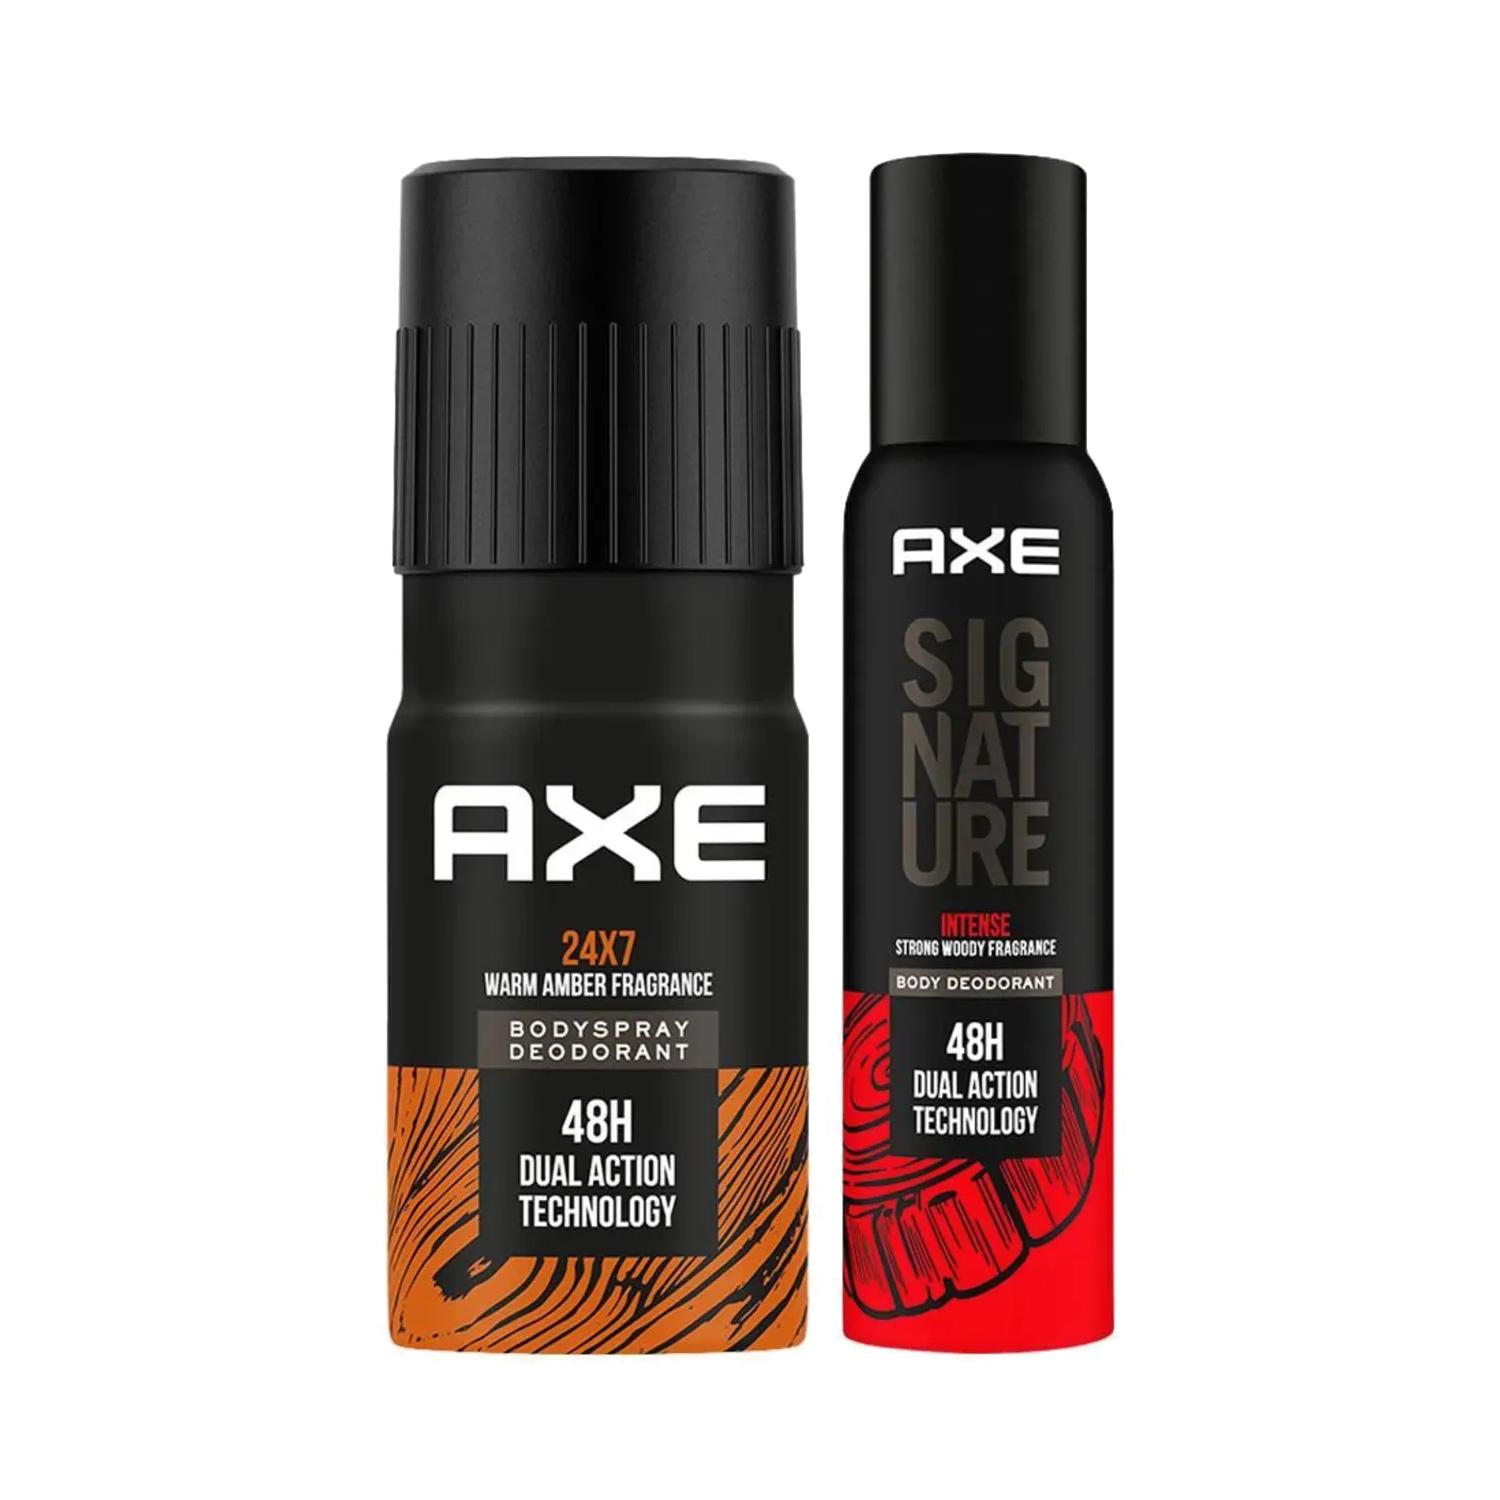 Axe Signature Denim After Shave Lotion, 100 ml | eBay